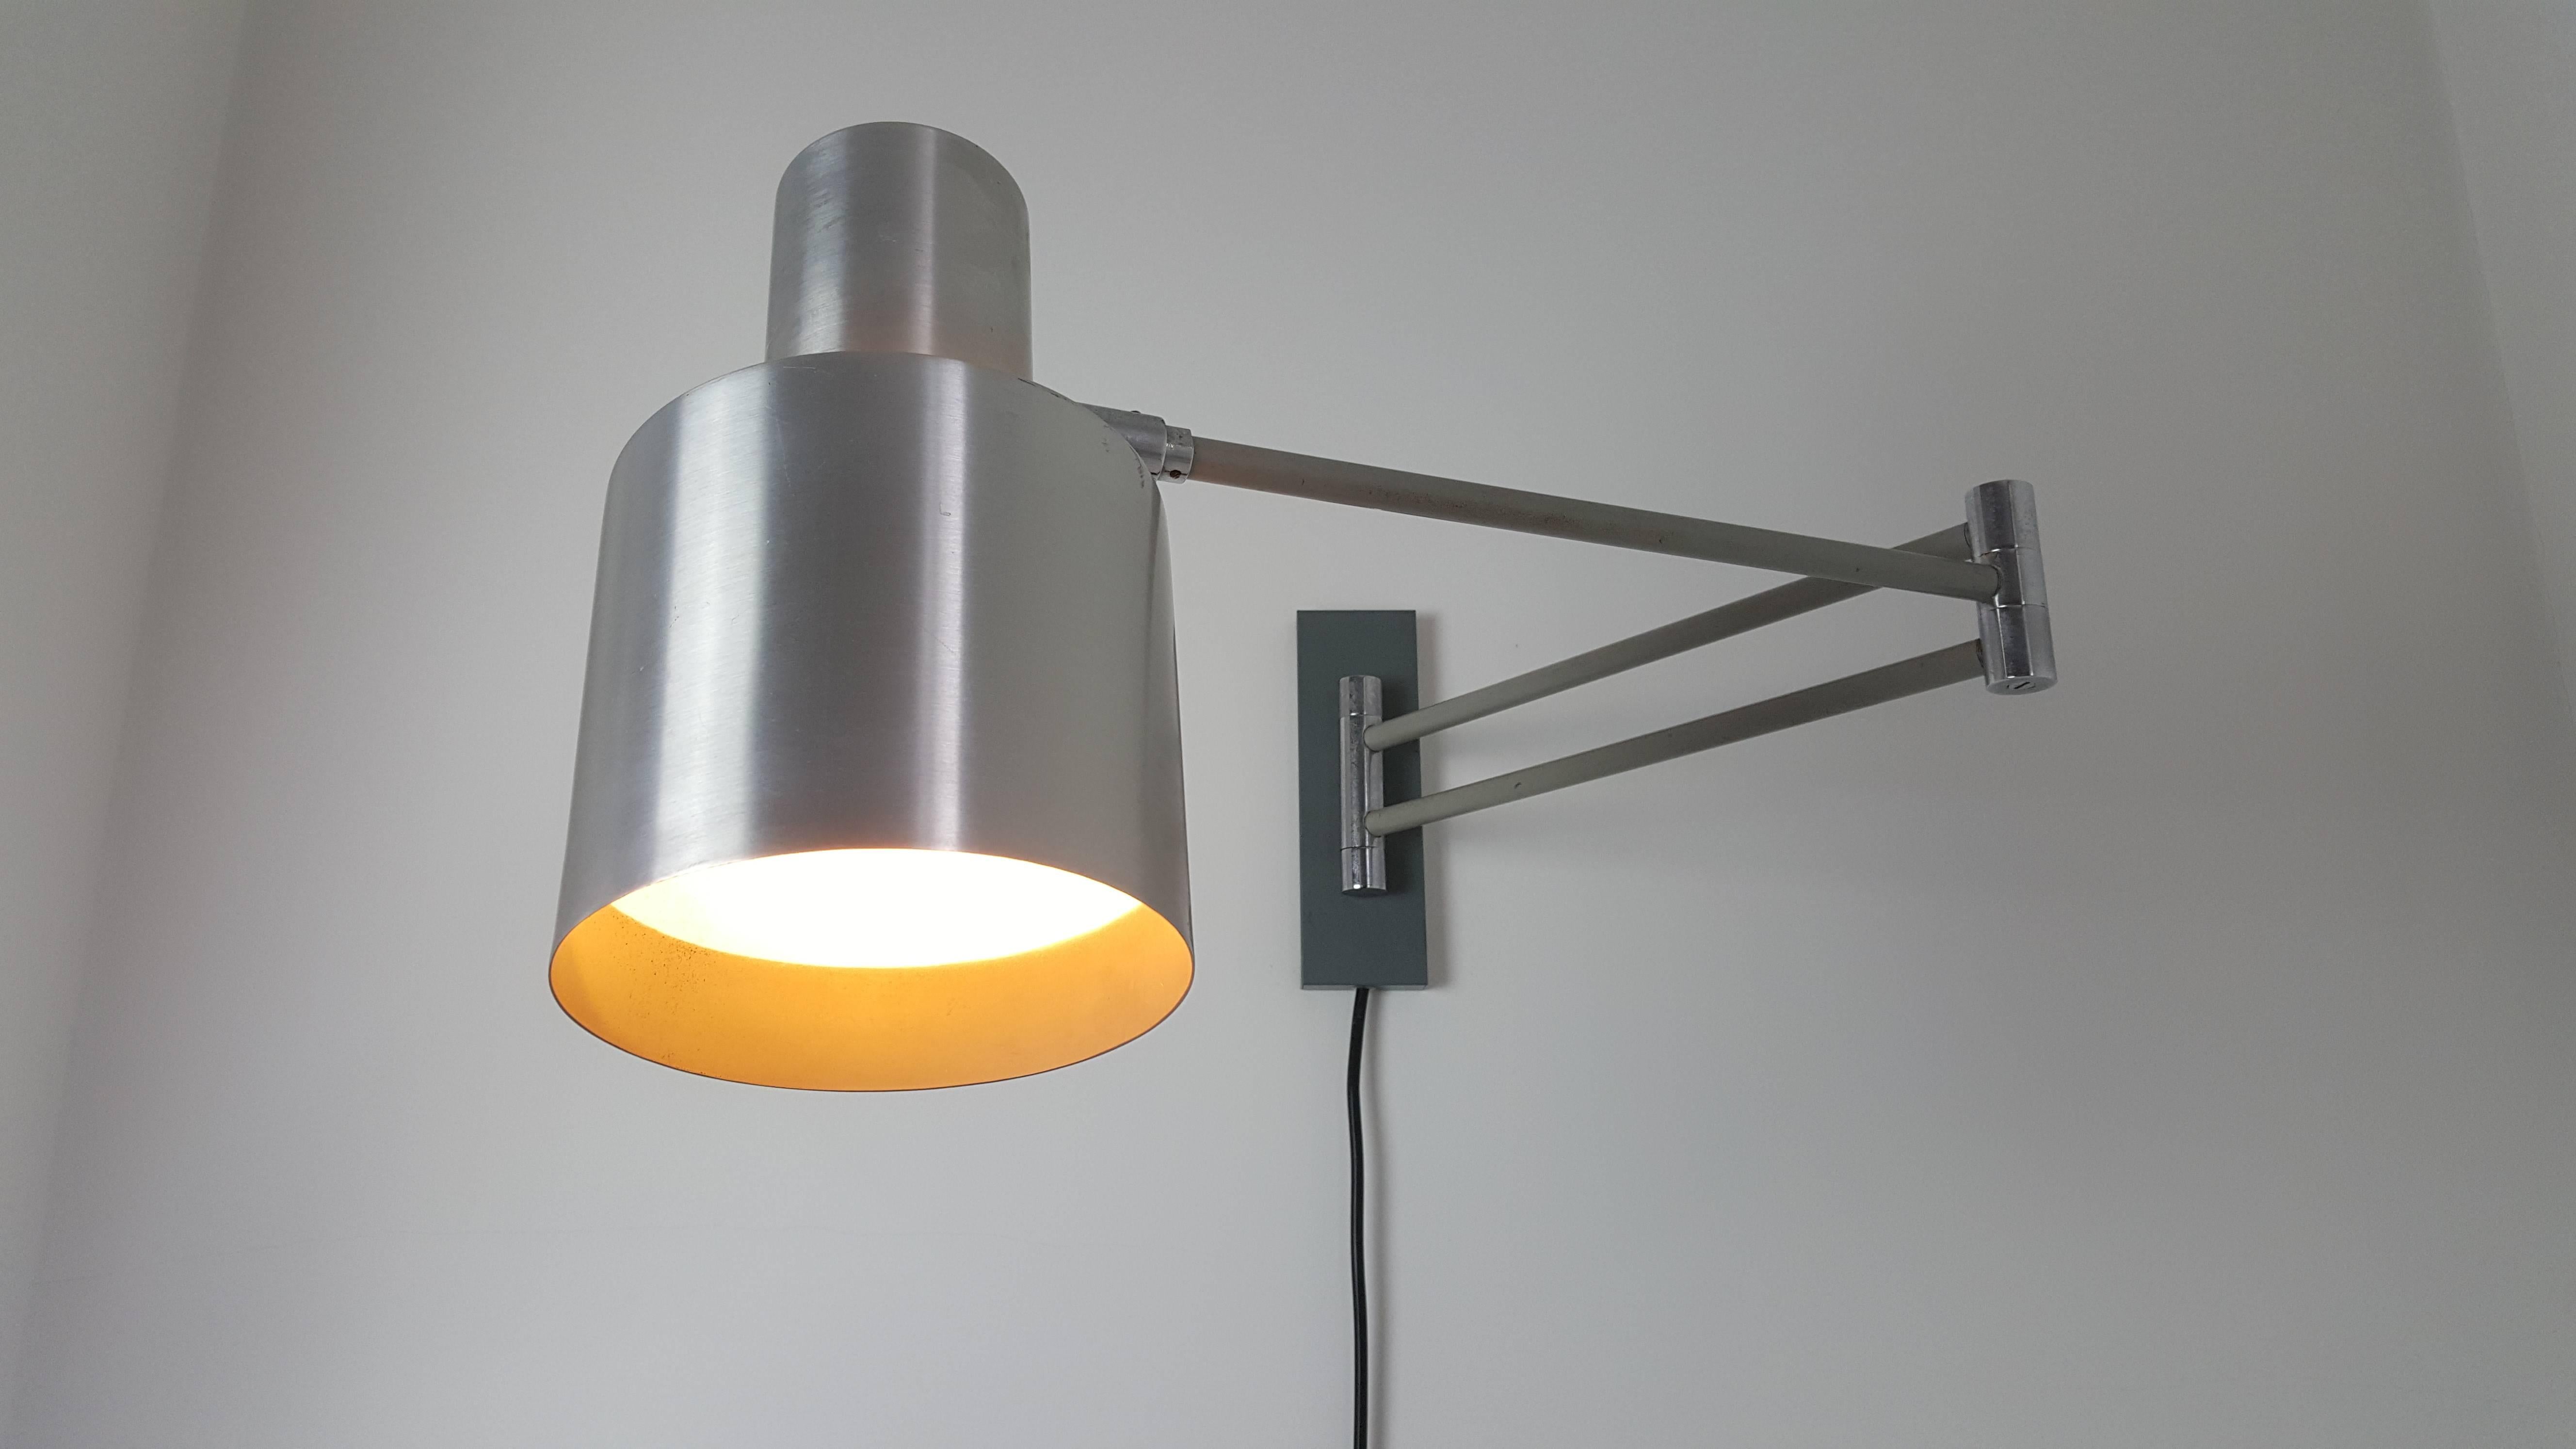 A 1960s Jo Hammerborg aluminium and grey lacquered steel 'Horisont' wall light, produced by Fog & Mørup, Denmark.

Designed by Jo Hammerborg in the 1960s. This design belongs to the golden years of Fog & Mørup which is still primarily known for